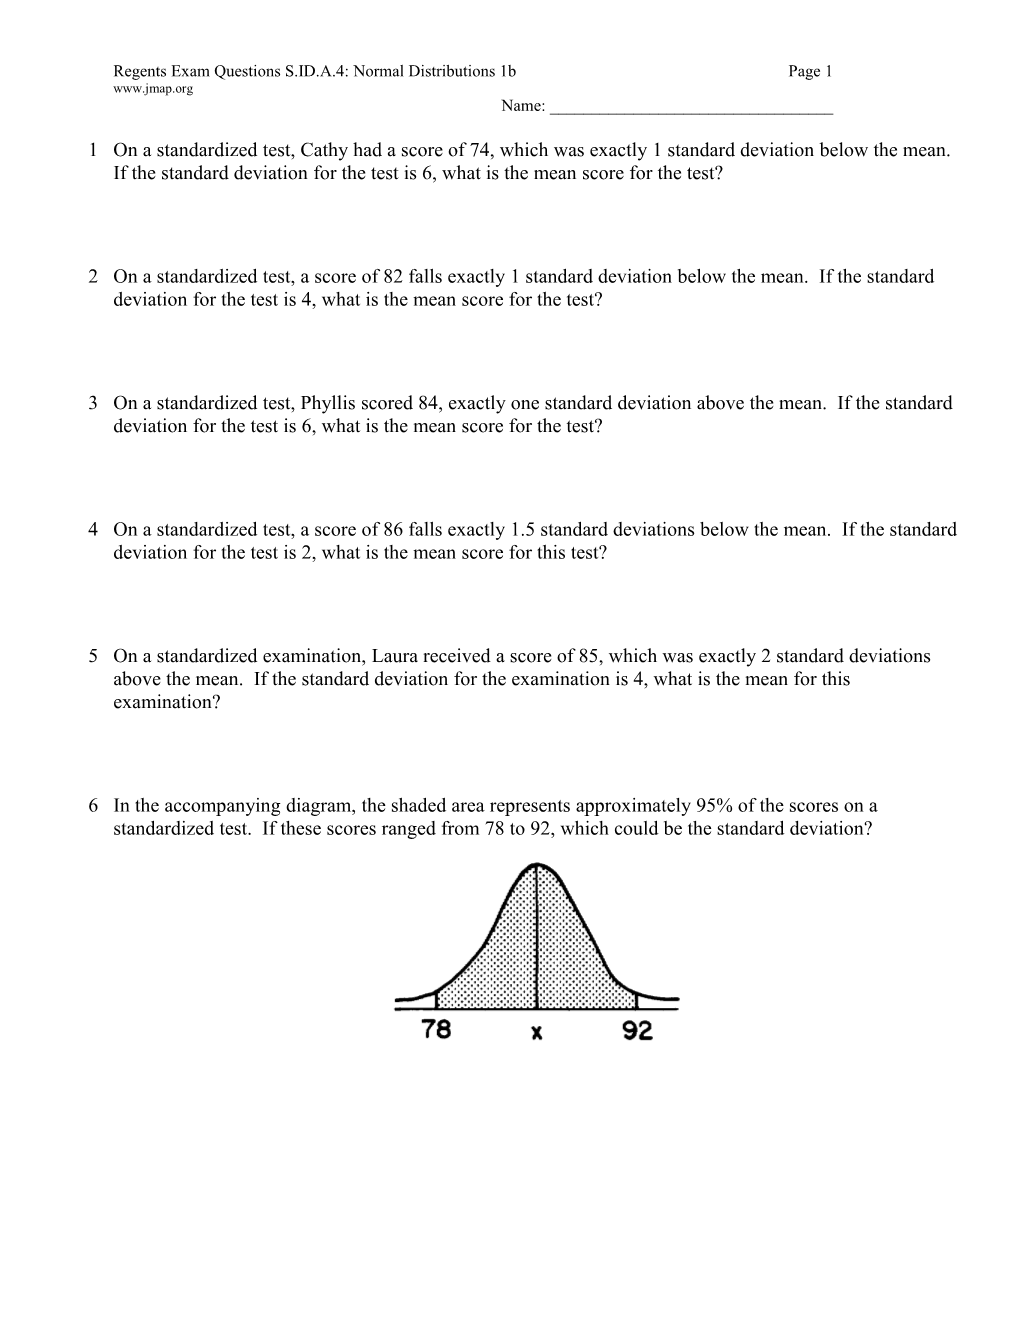 Regents Exam Questions S.ID.A.4: Normal Distributions 1Bpage 1